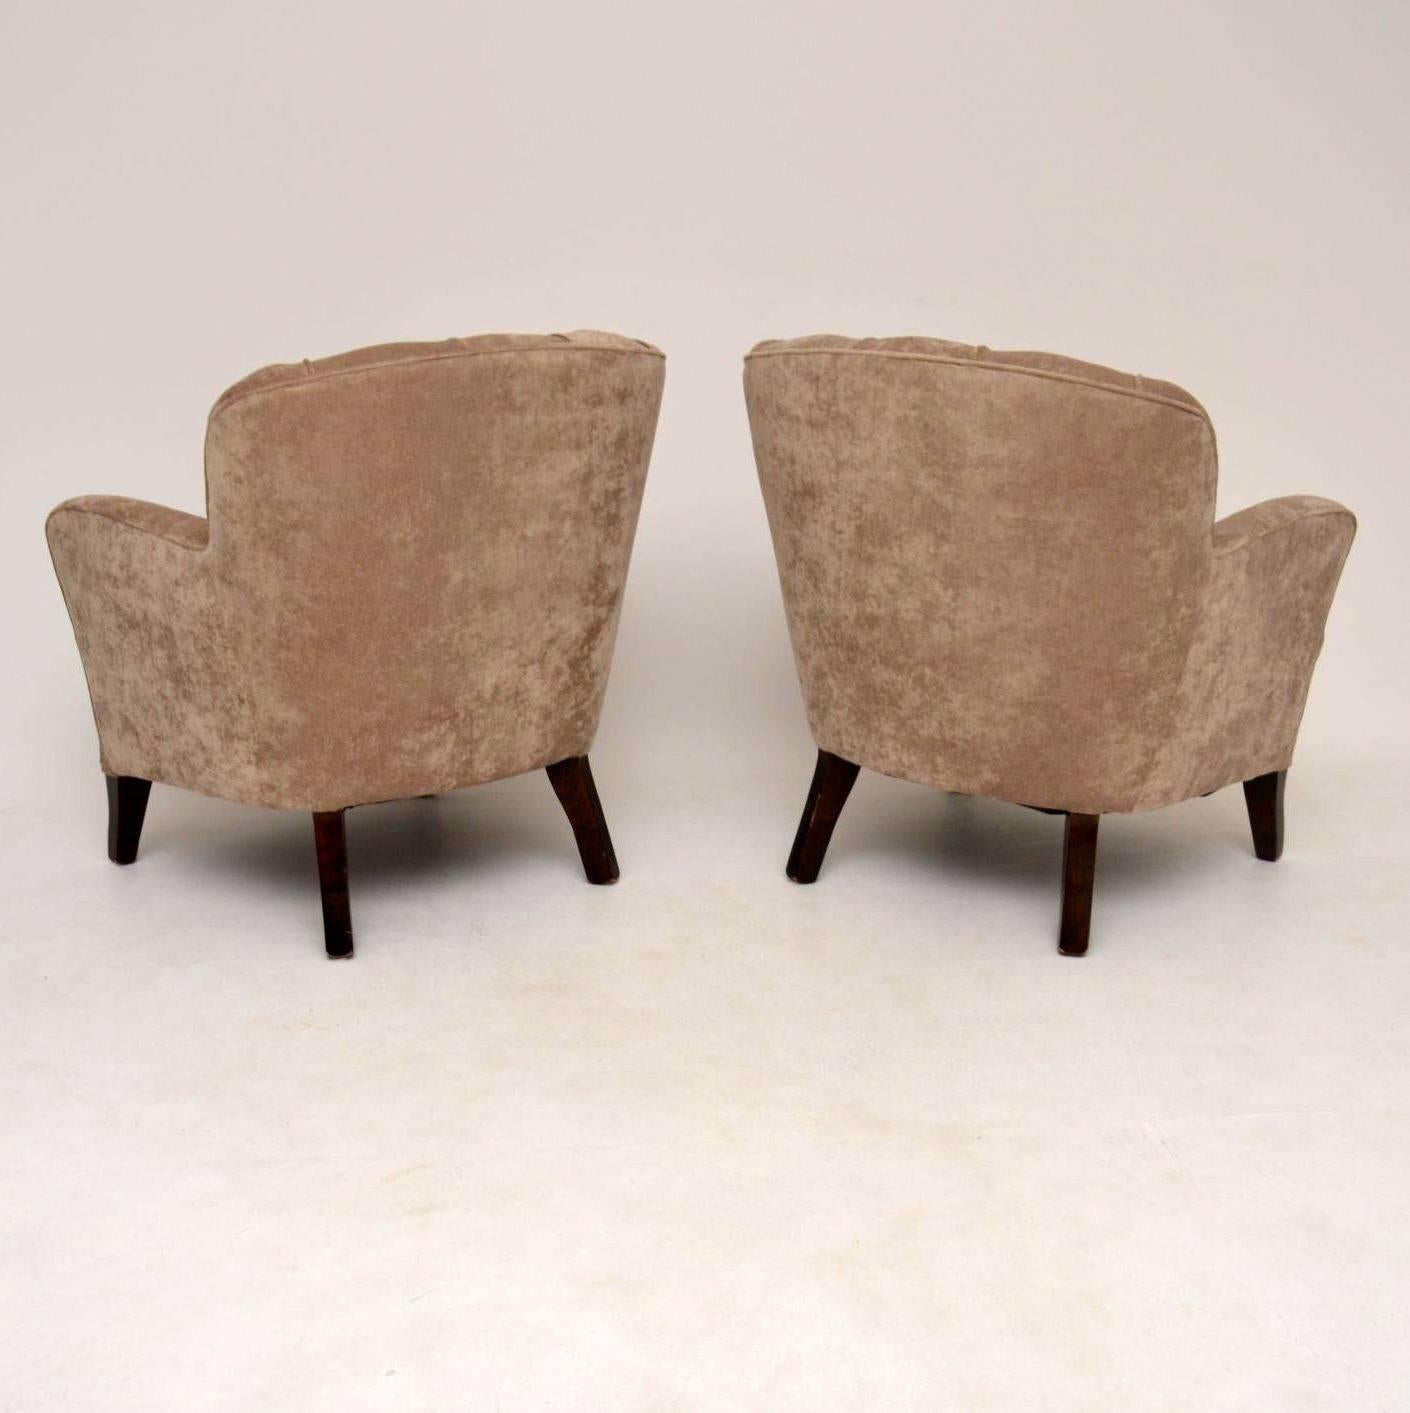 This pair of Swedish 1930s Art Deco armchairs also come with a matching three-seat sofa, which is showing in this listing and also shown separately on the web site. This whole set came over from Sweden and has been re-upholstered in a lovely velour